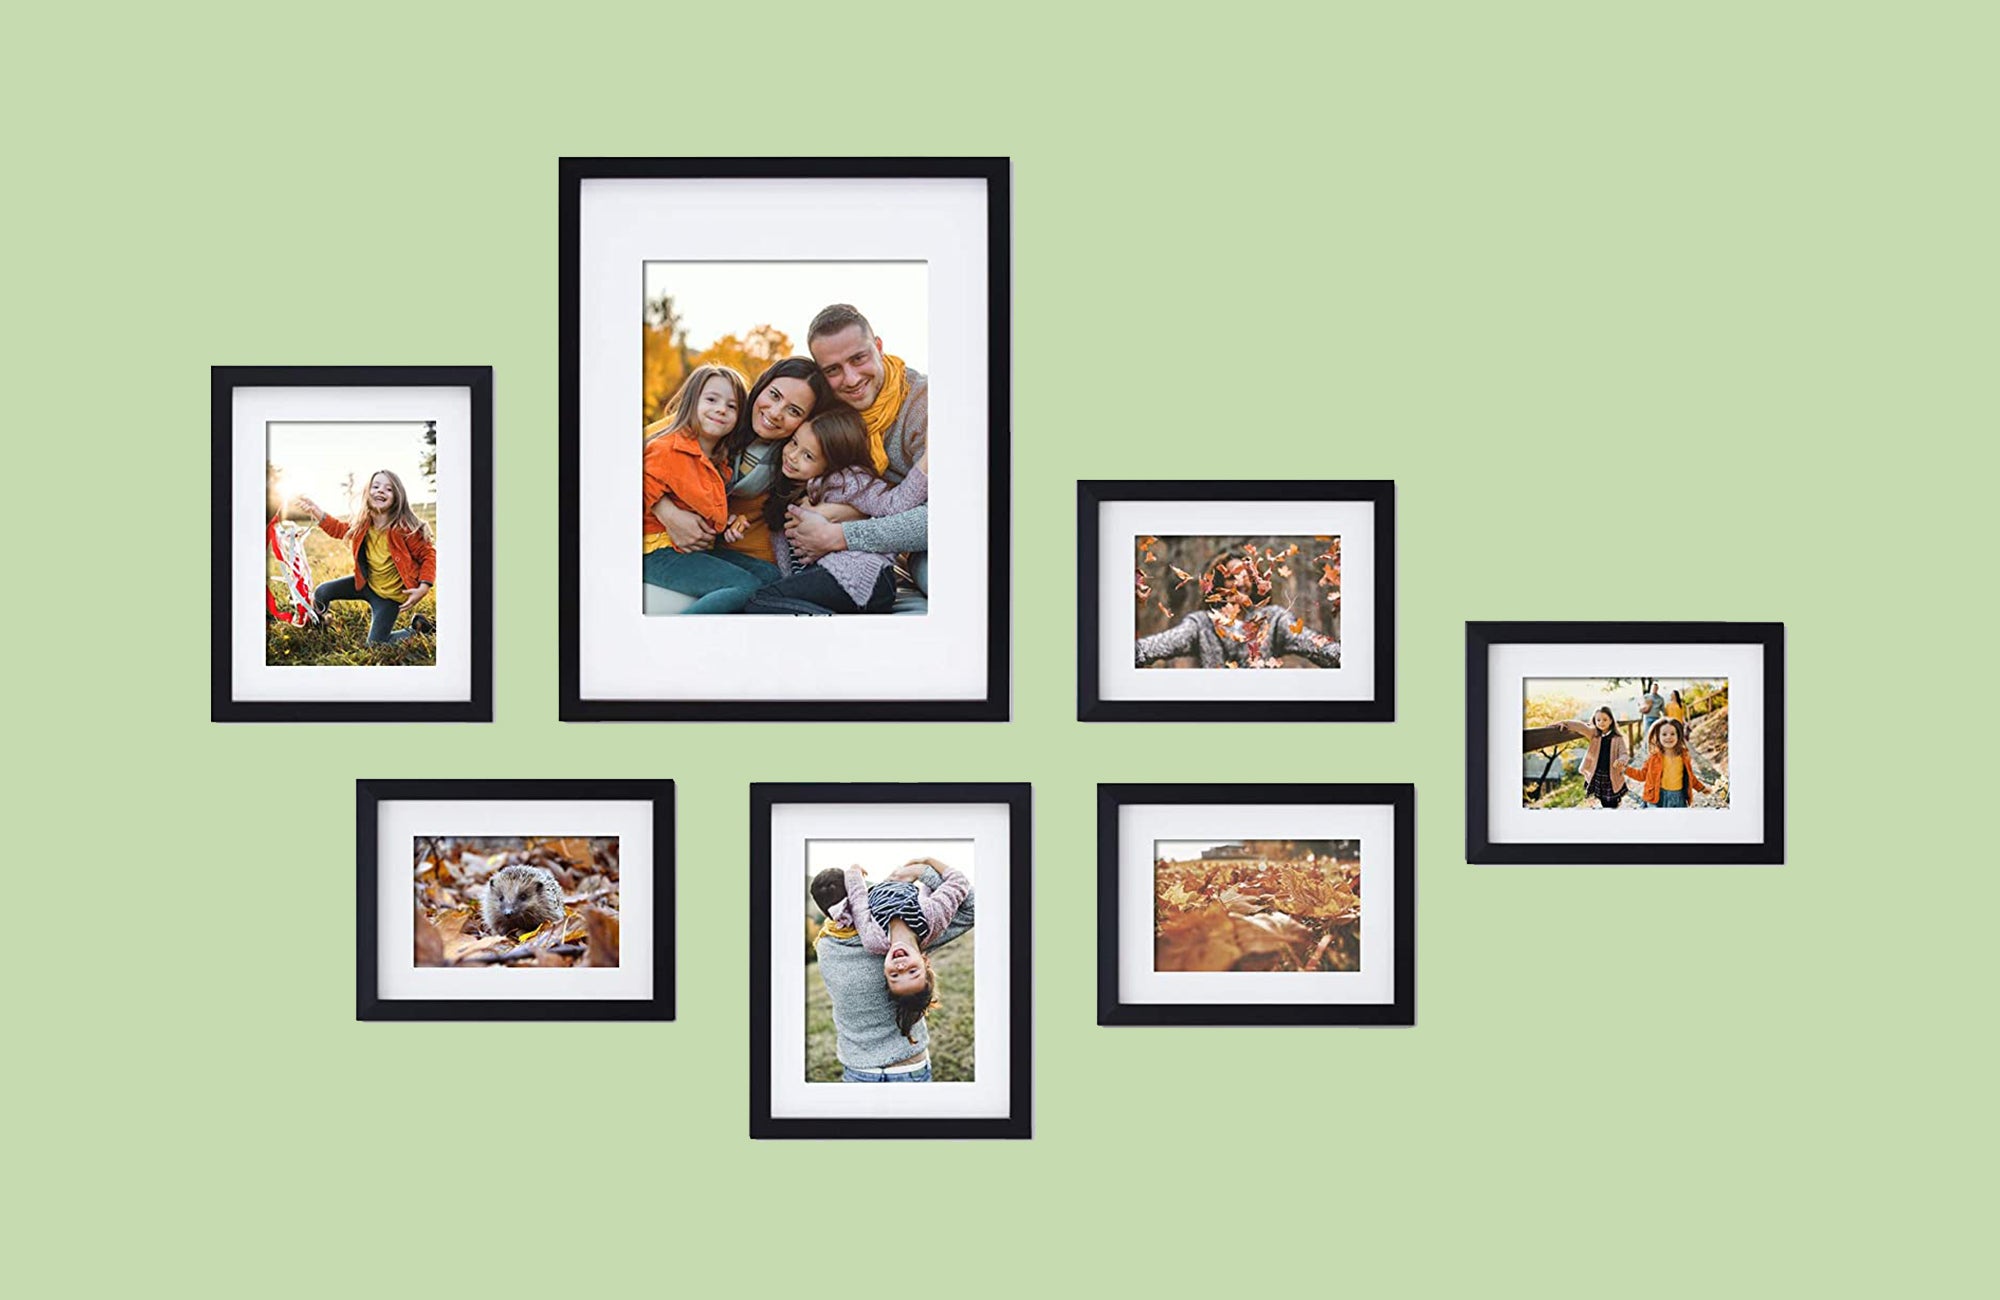 How to Hang Tabletop Photo Frames on the Wall